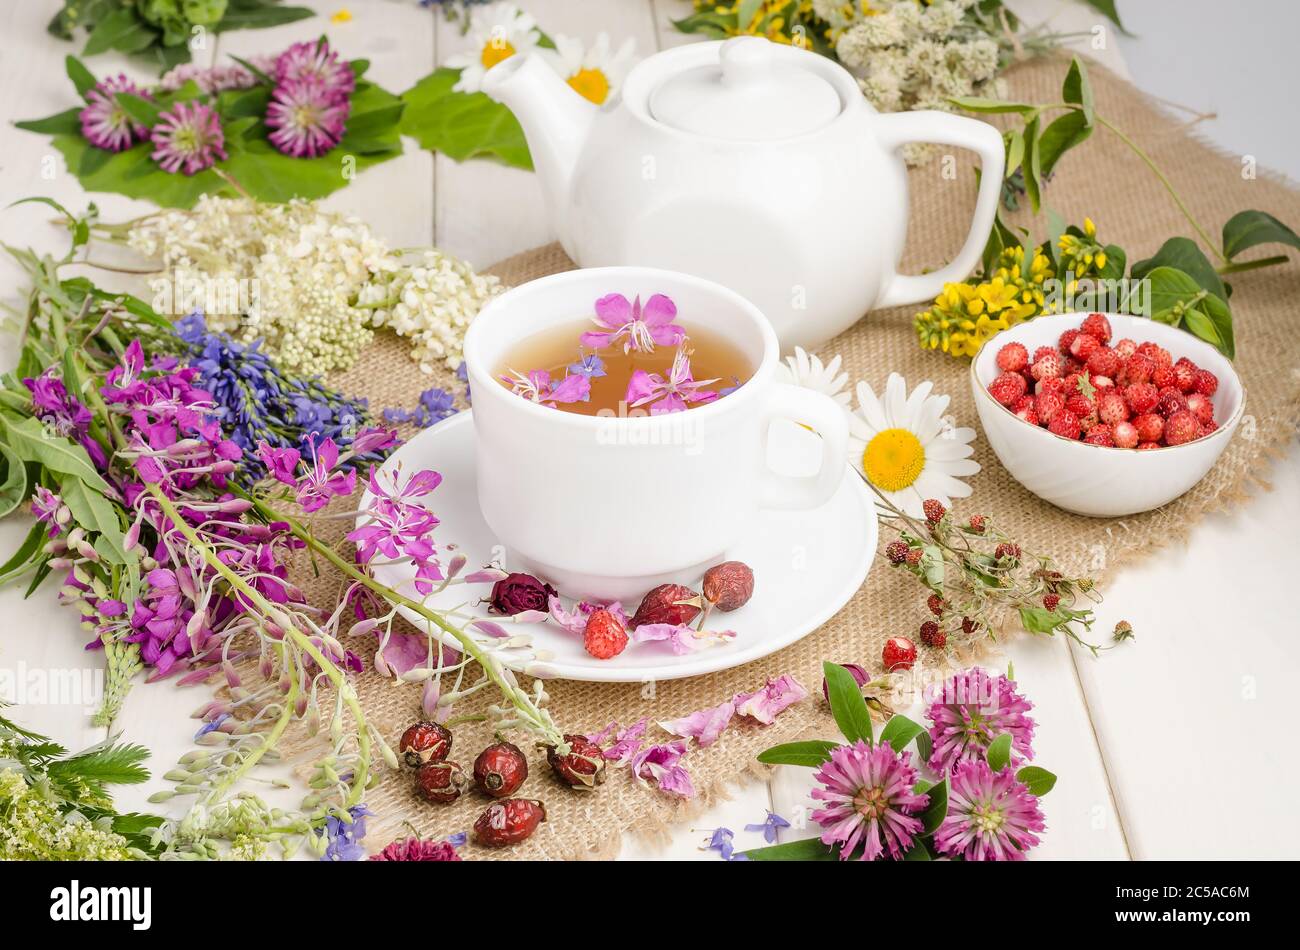 Herbal tea in a white cup with flowers. Tea ceremony. Tea with chamomile, with wild rose and clover Stock Photo